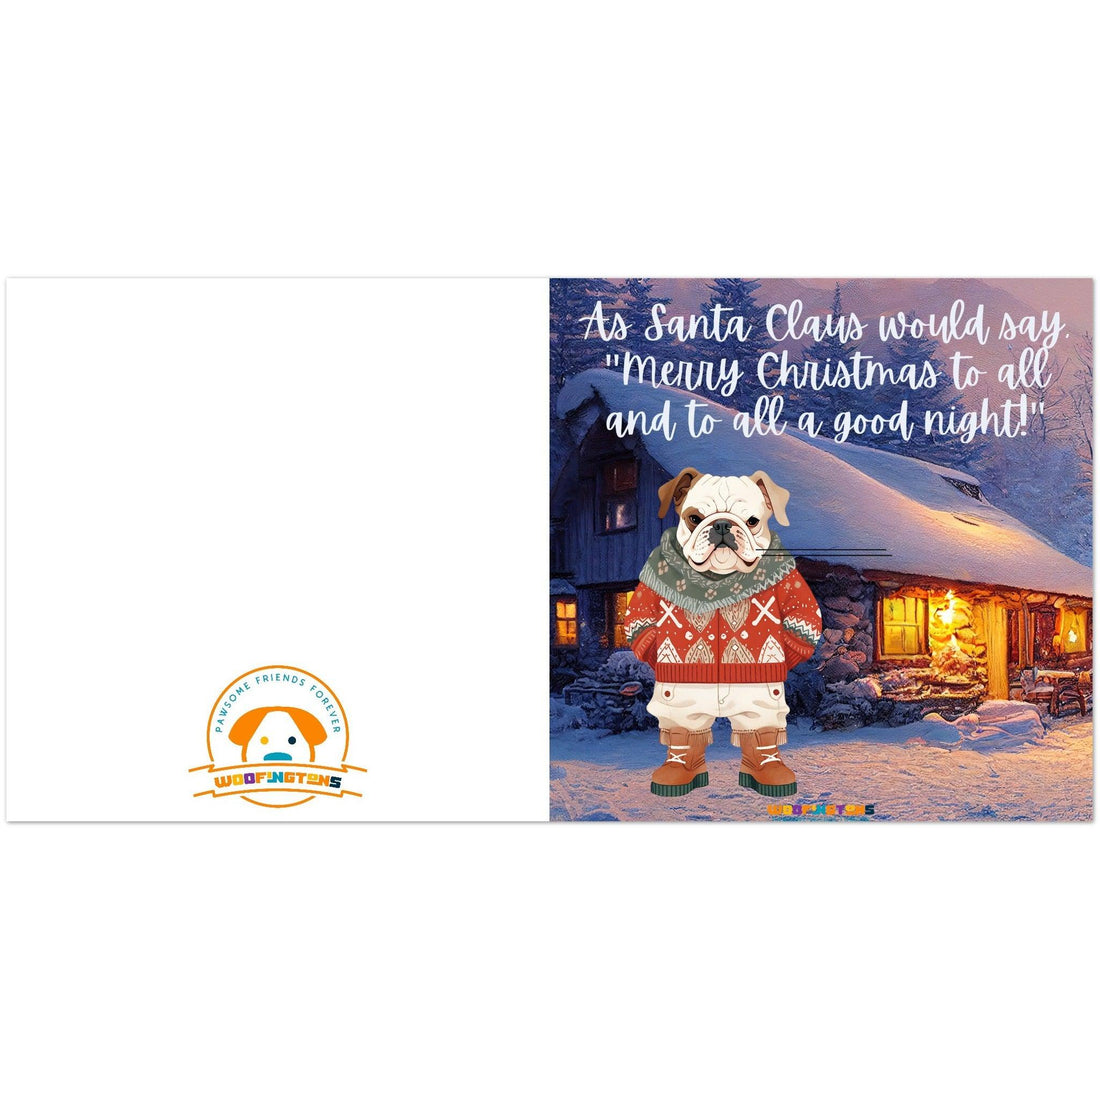 &quot;As Santa Claus would say, &quot;Merry Christmas to all and to all a good night!&quot;&quot; - Whimsical Winter Dog Christmas Card - Pack of 10 Greeting Cards (premium envelopes) - Woofingtons